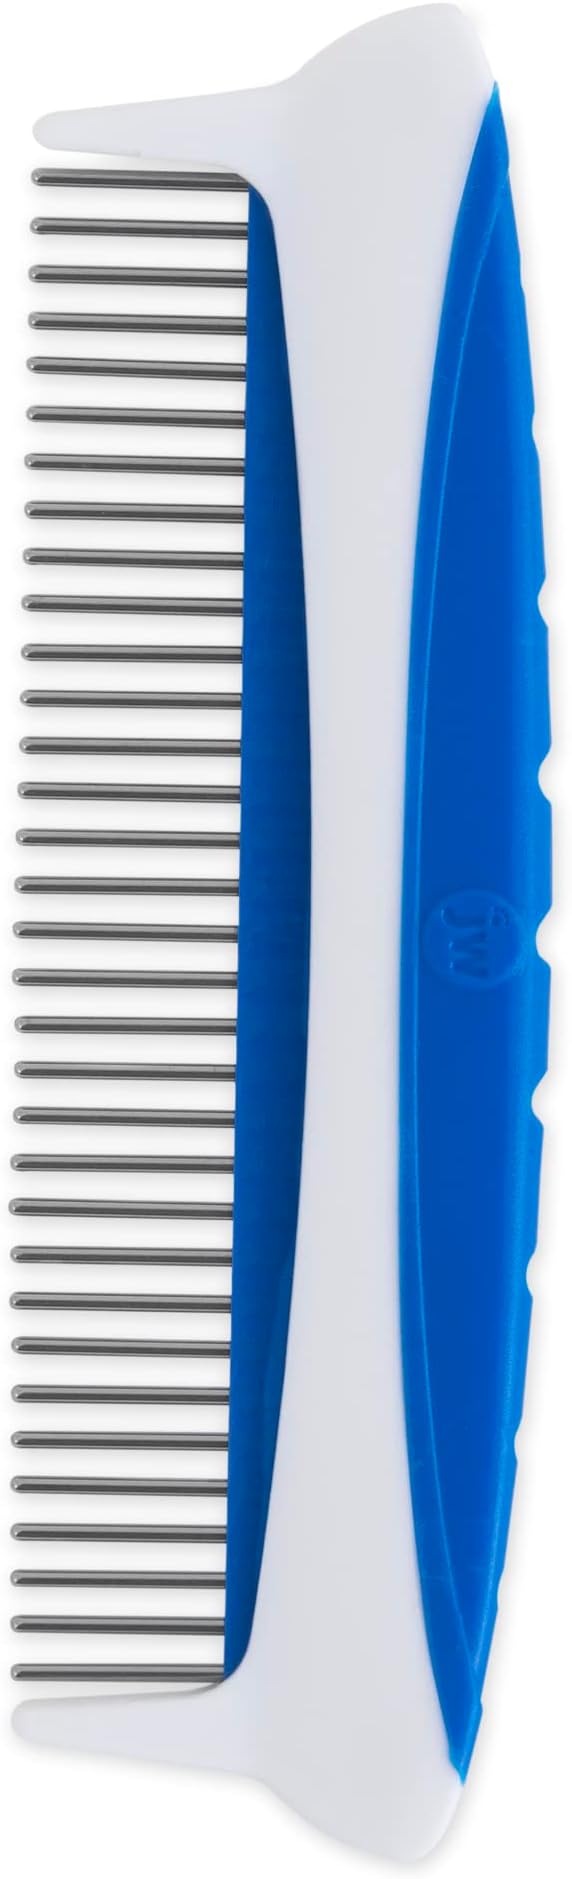 JW Pet Comfort Comb stands out due to its robust performance in detangling and maintaining your pet's coat.